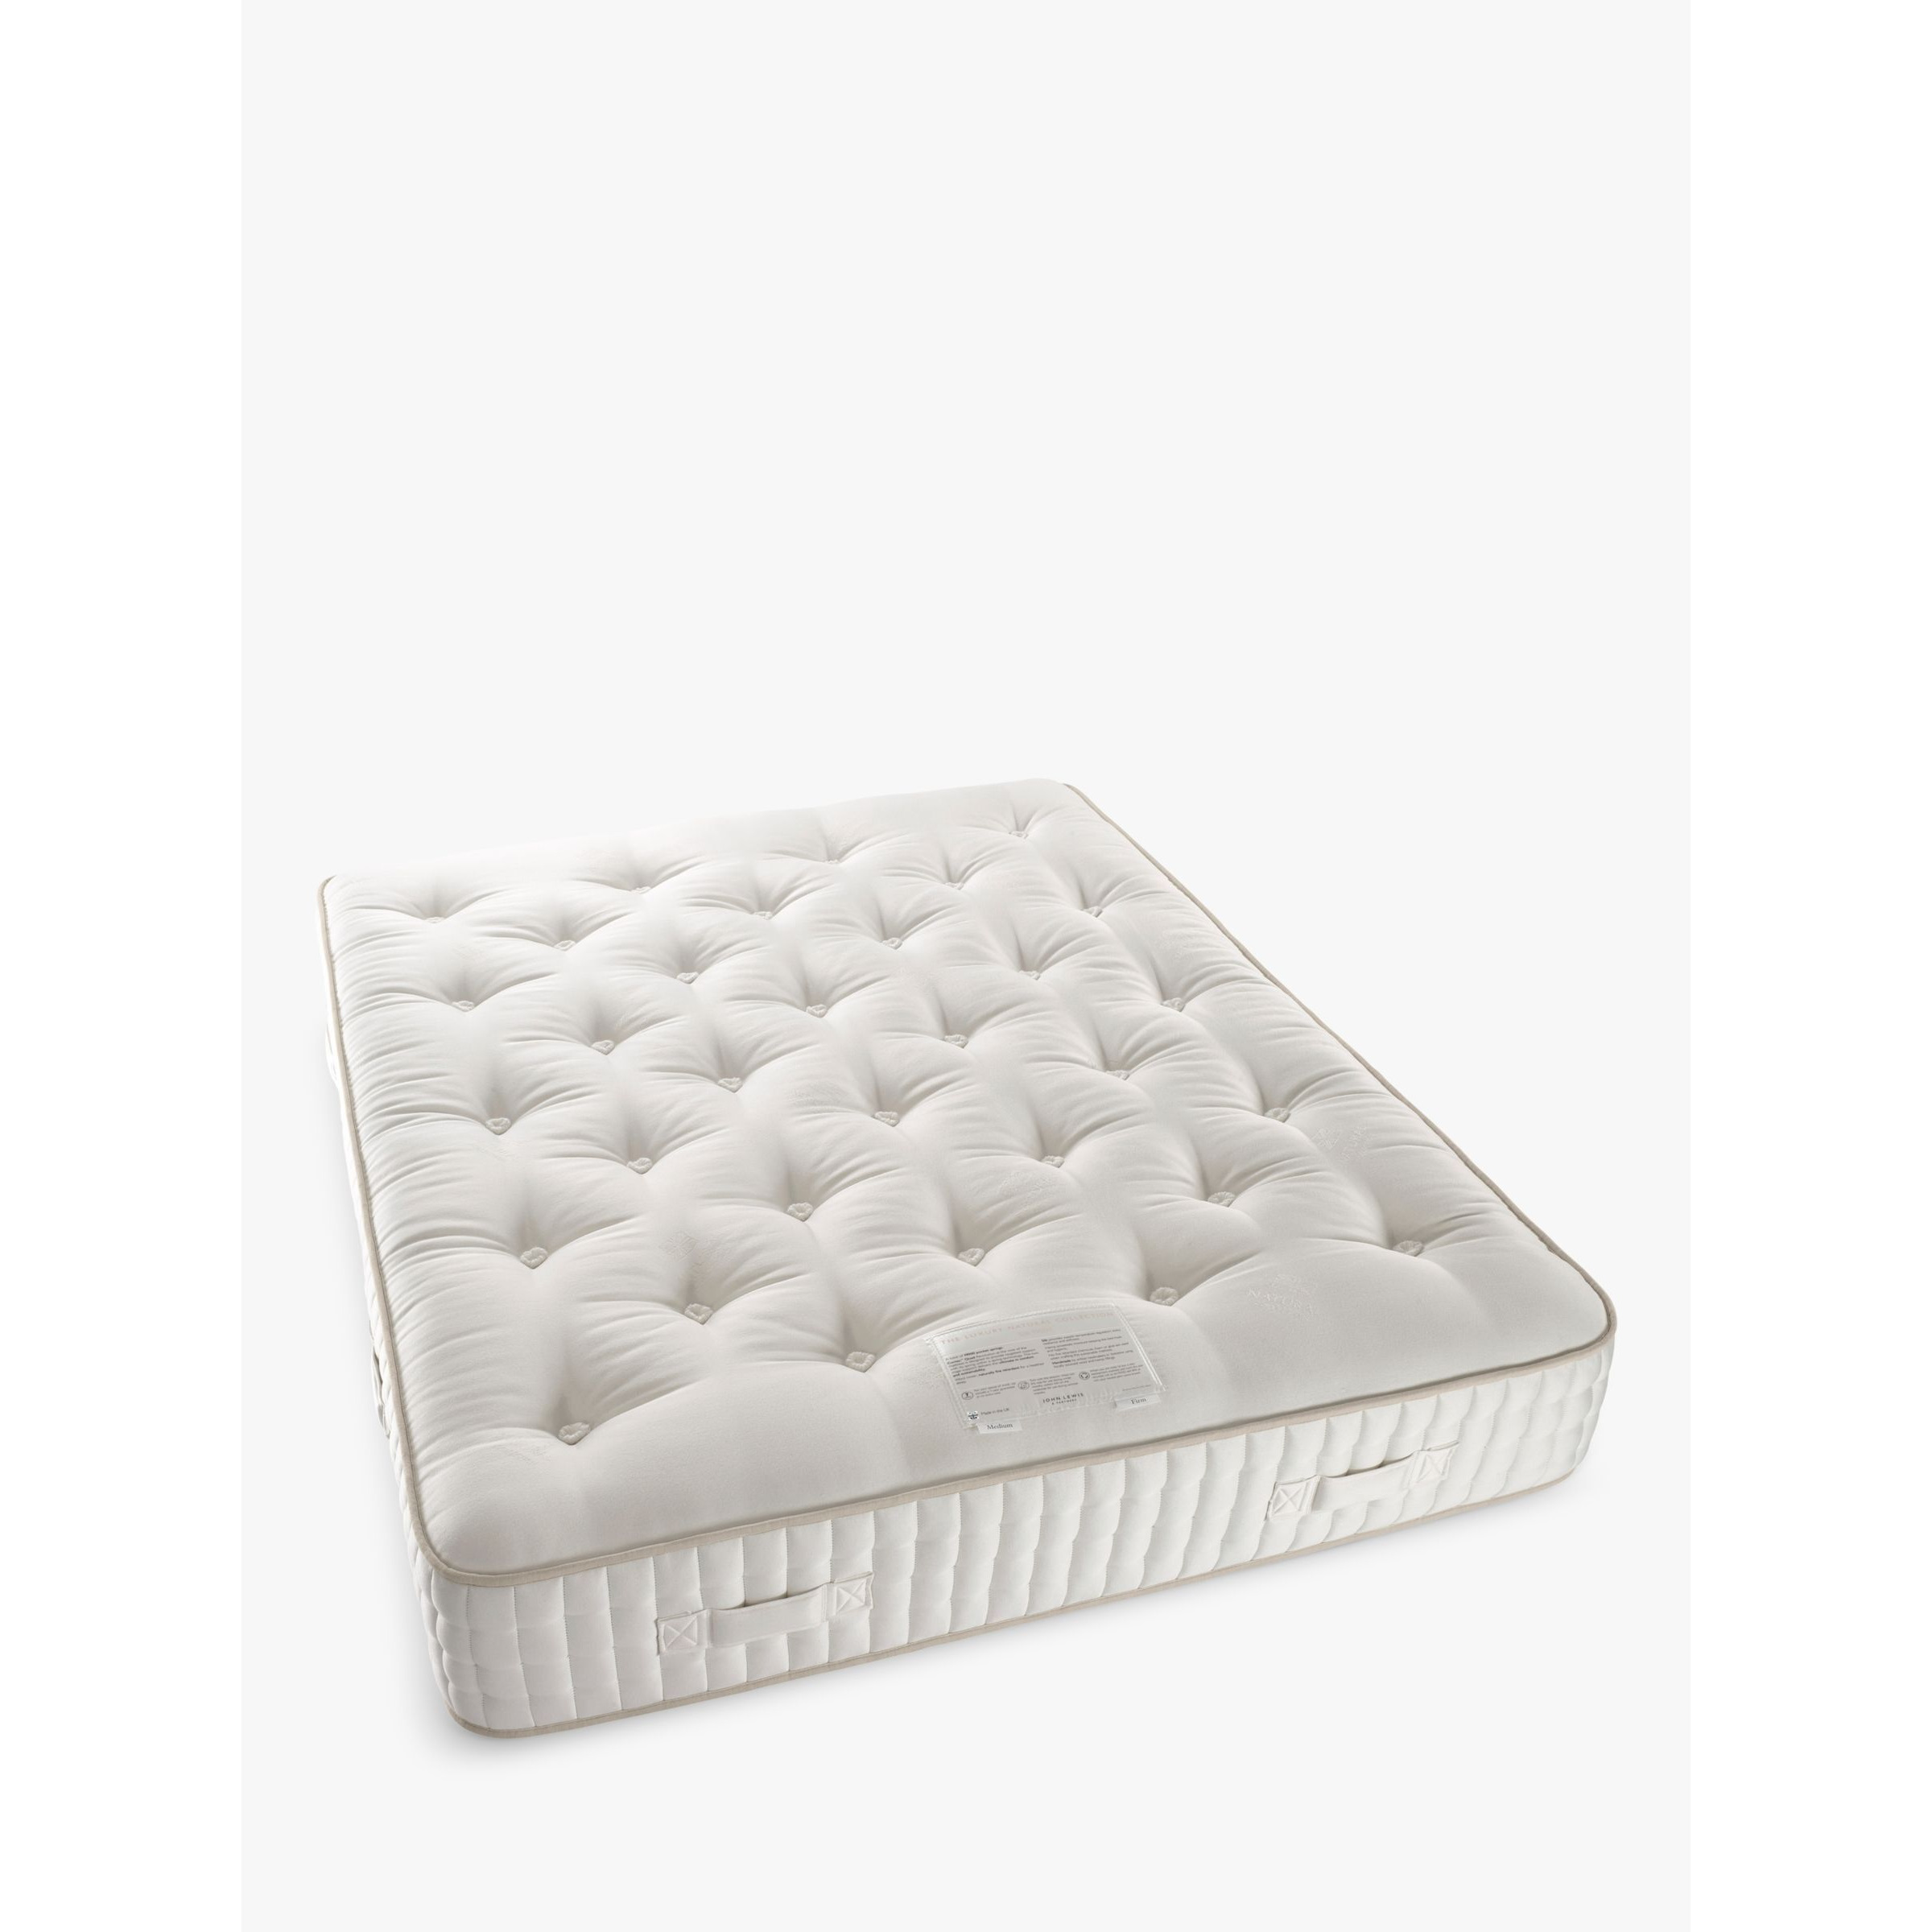 John Lewis Luxury Natural Collection Silk 19000, Small Double, Firmer Tension Pocket Spring Mattress - image 1